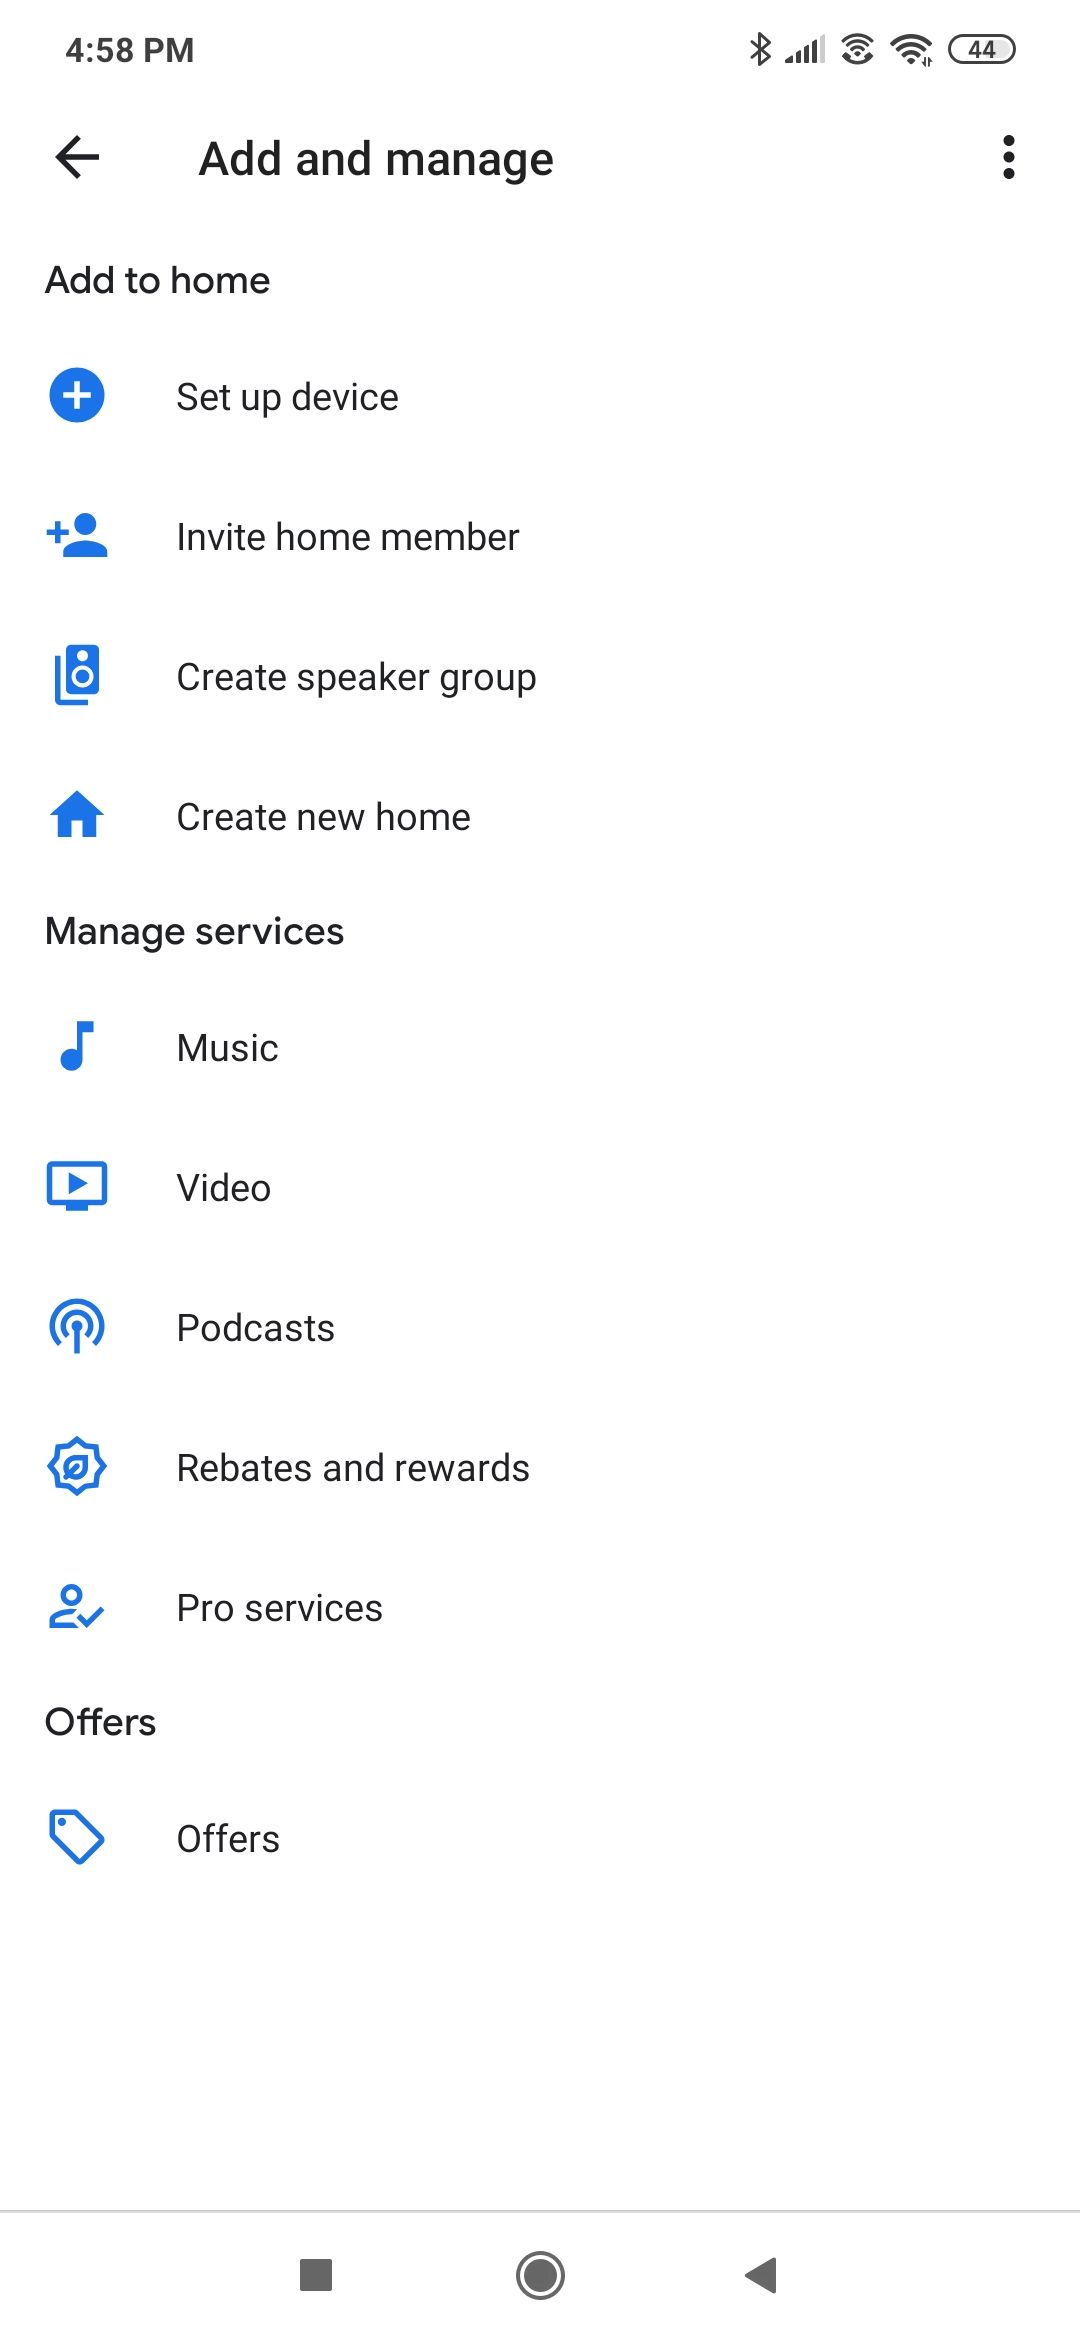 The add device section of the Google Home app